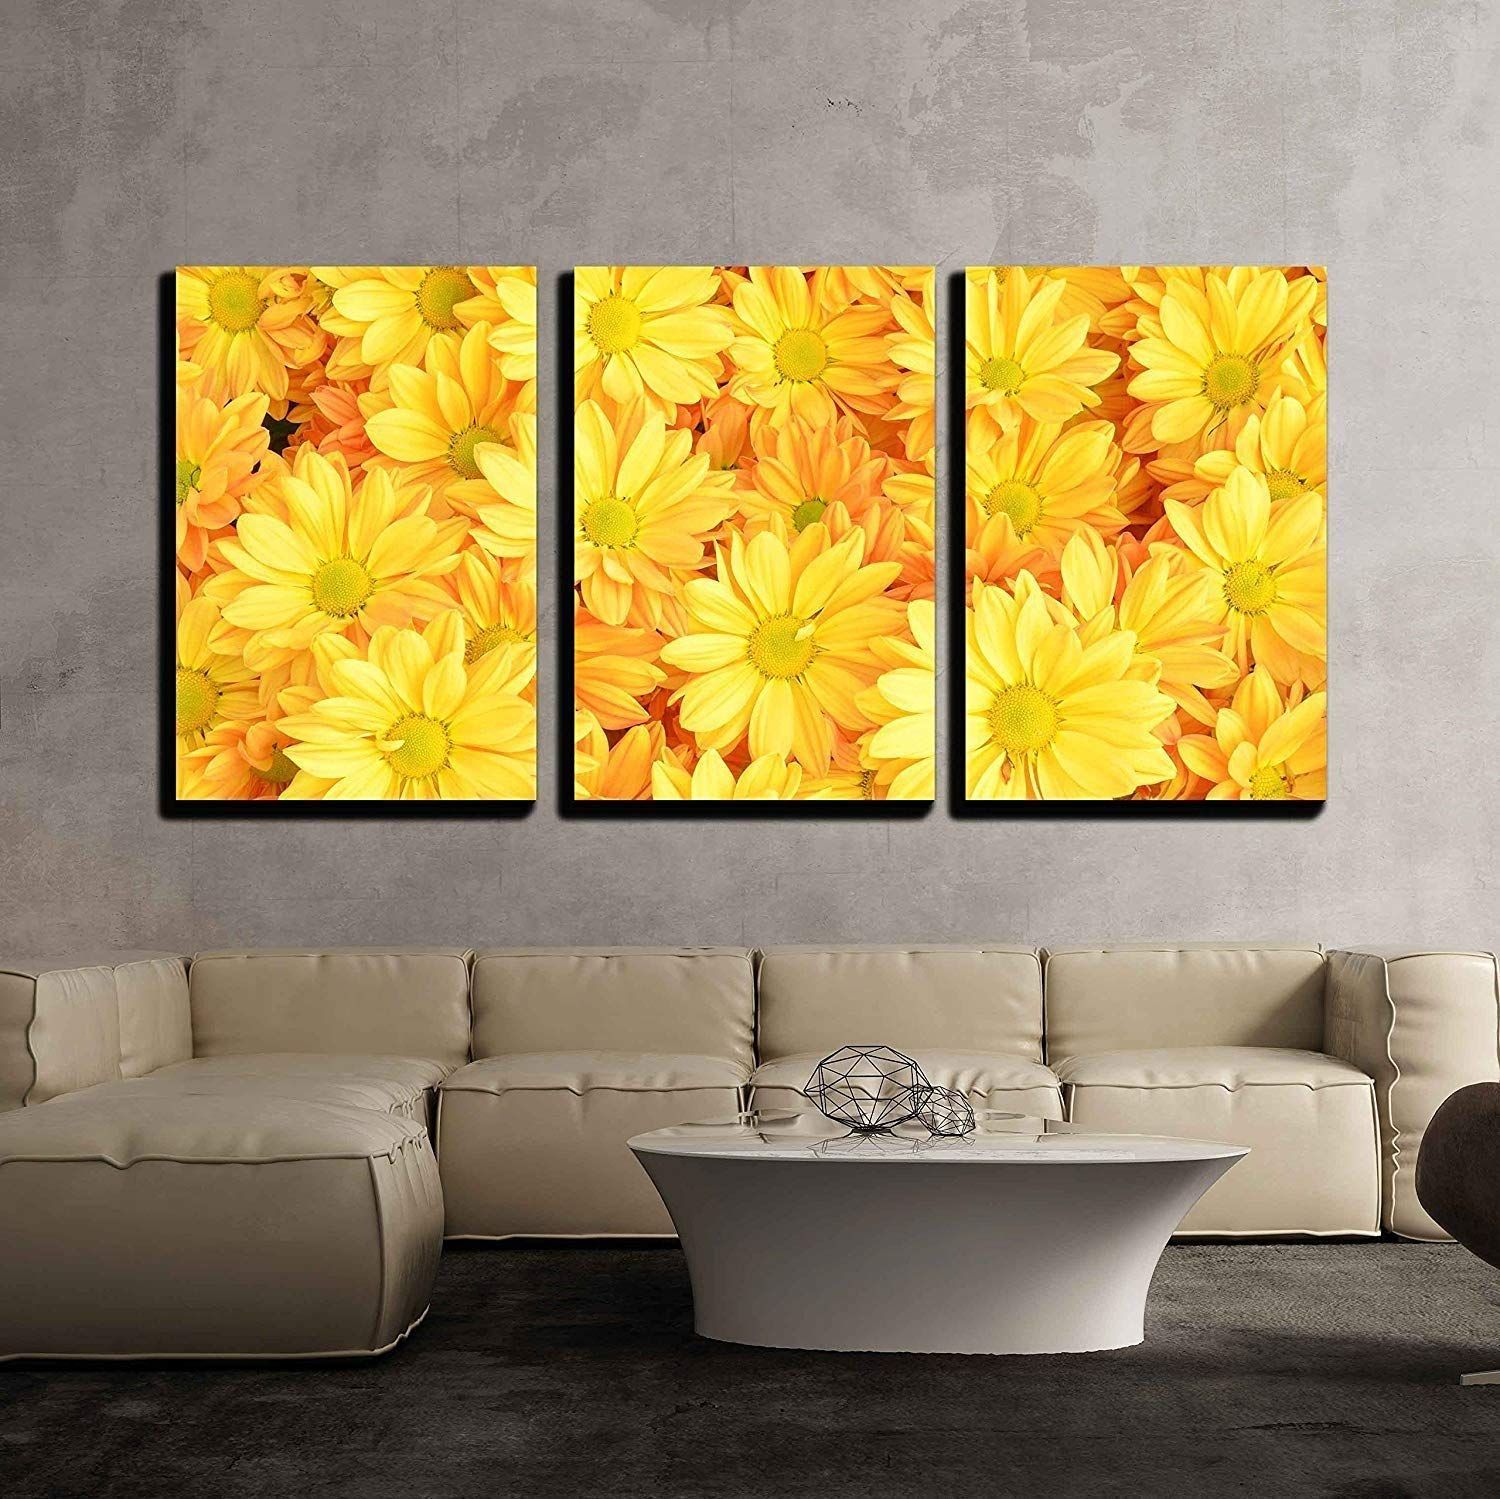 Wall26 – 3 Piece Canvas Wall Art – Yellow Chrysanthemum Flowers Within Newest Large Wall Decor Ornaments (View 10 of 20)